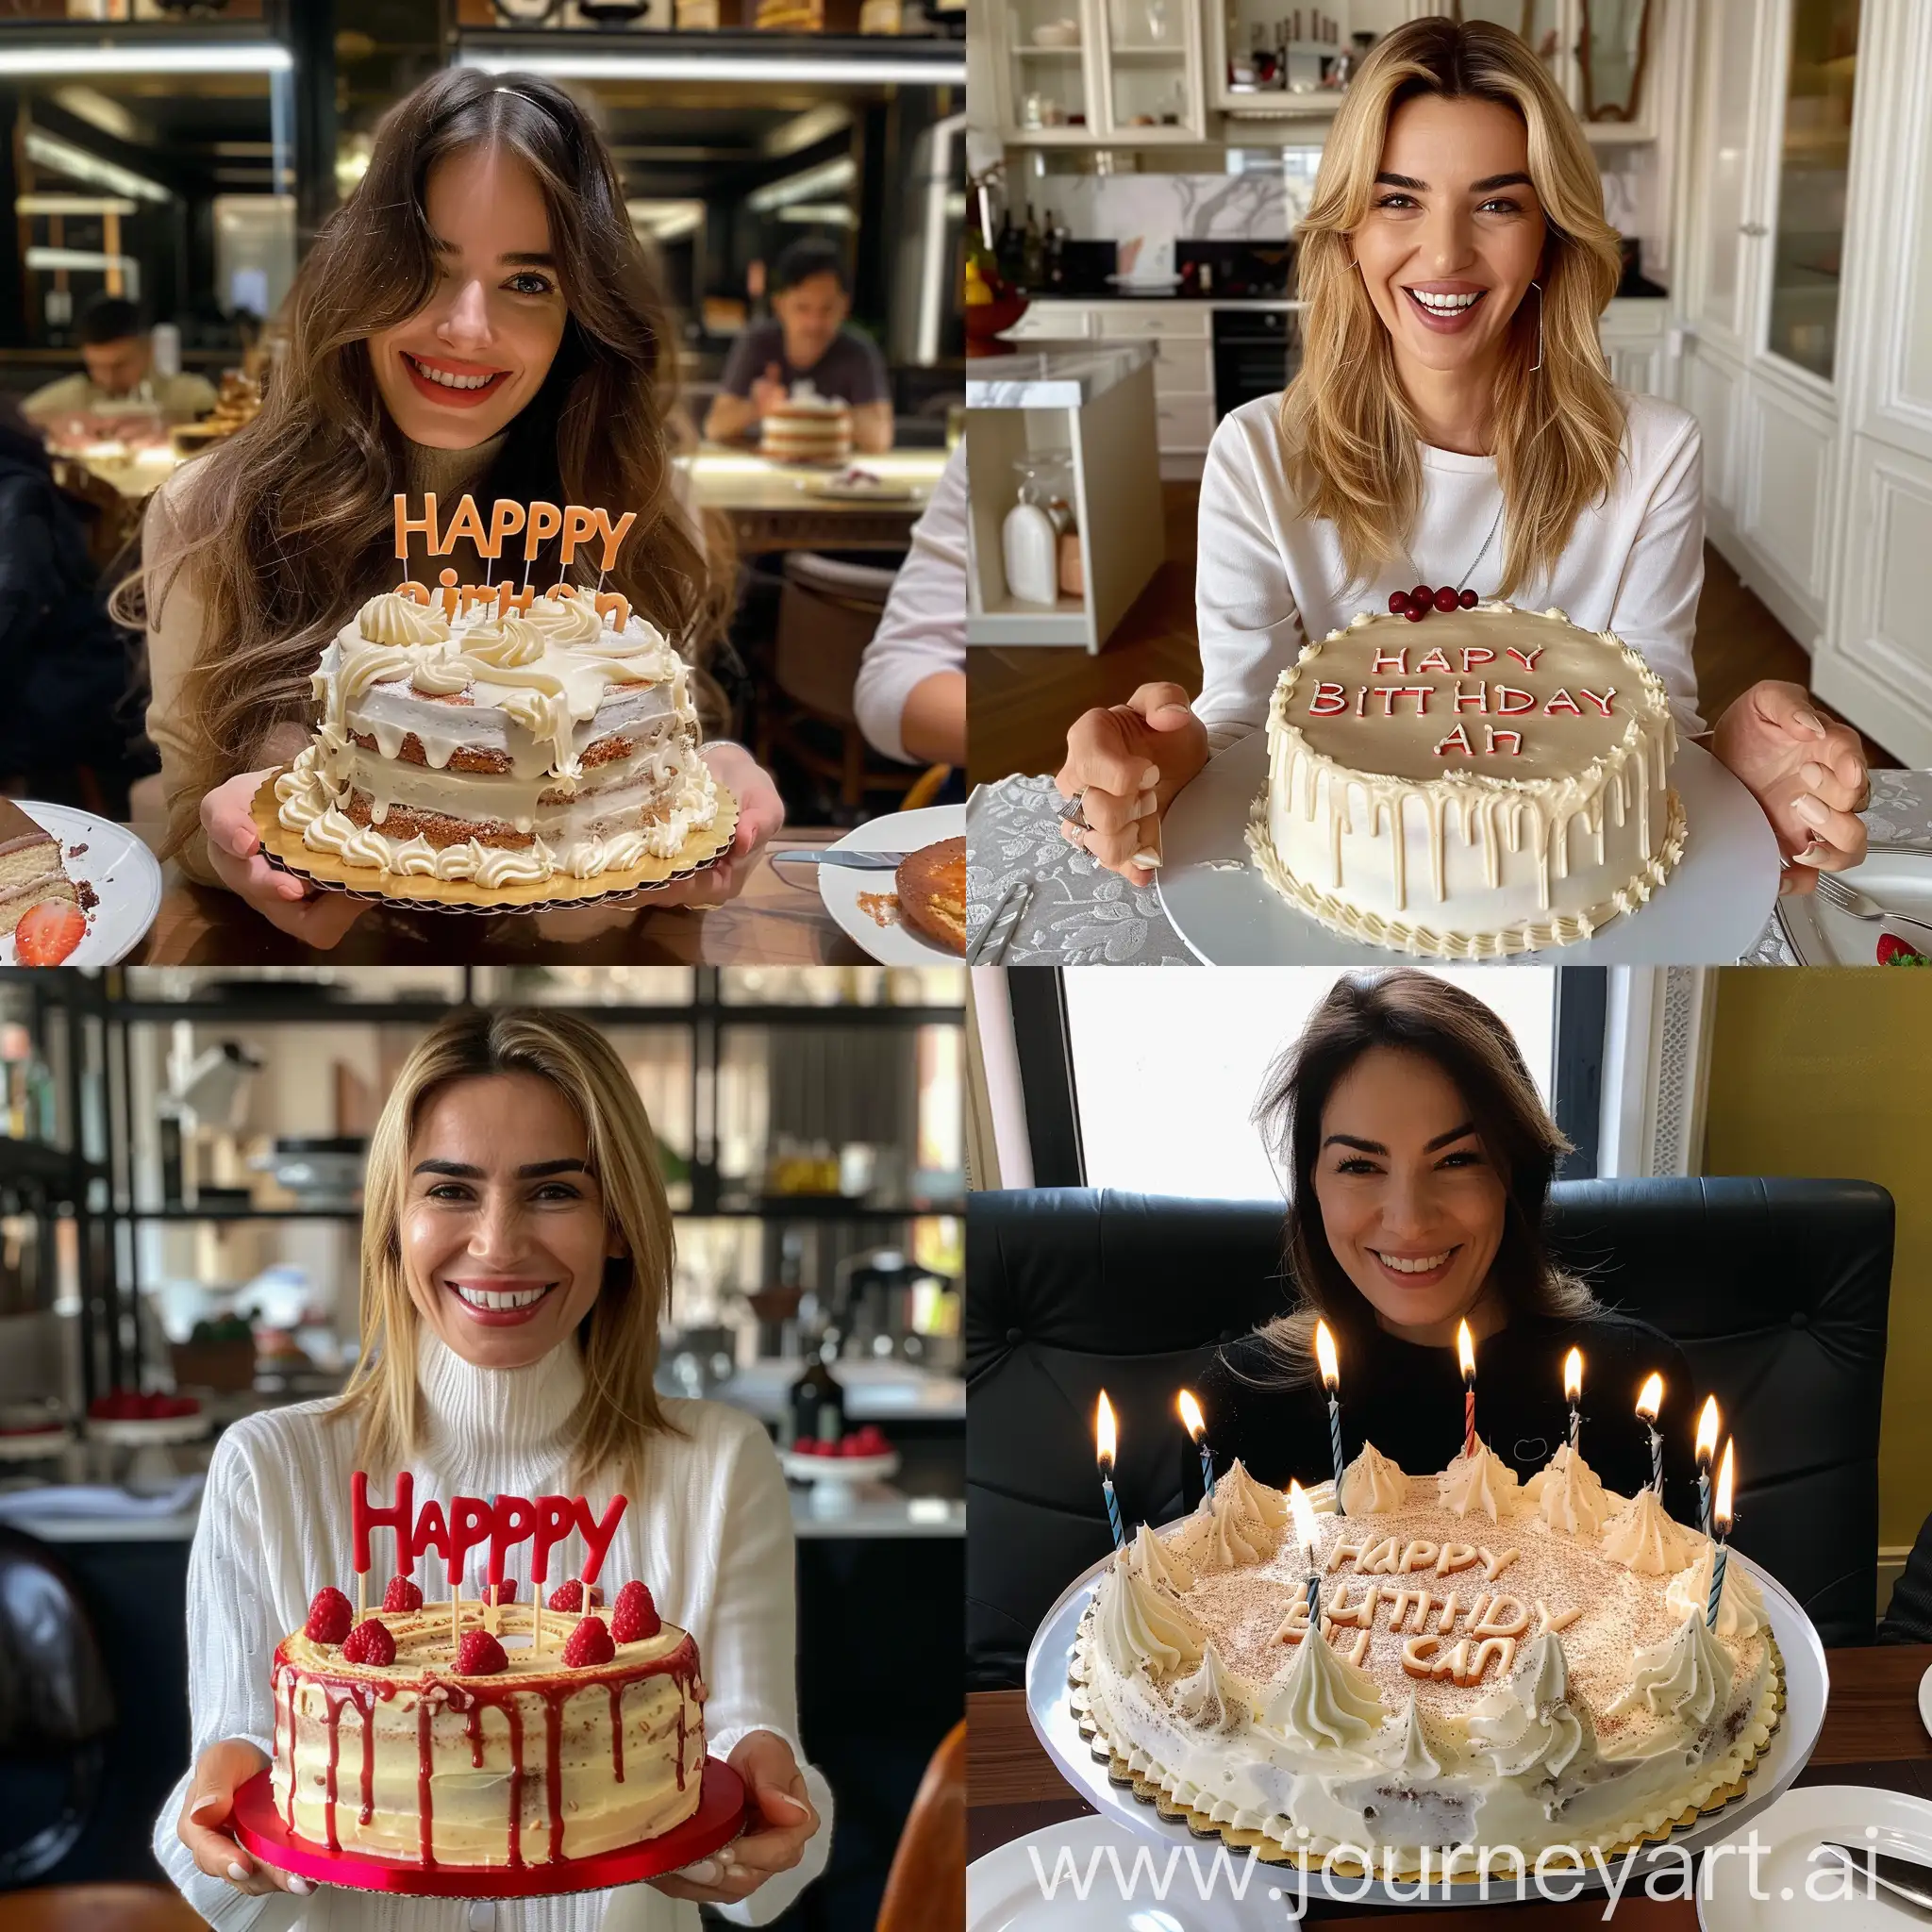 Sibel can the Turkish singer has a happy birthday cake